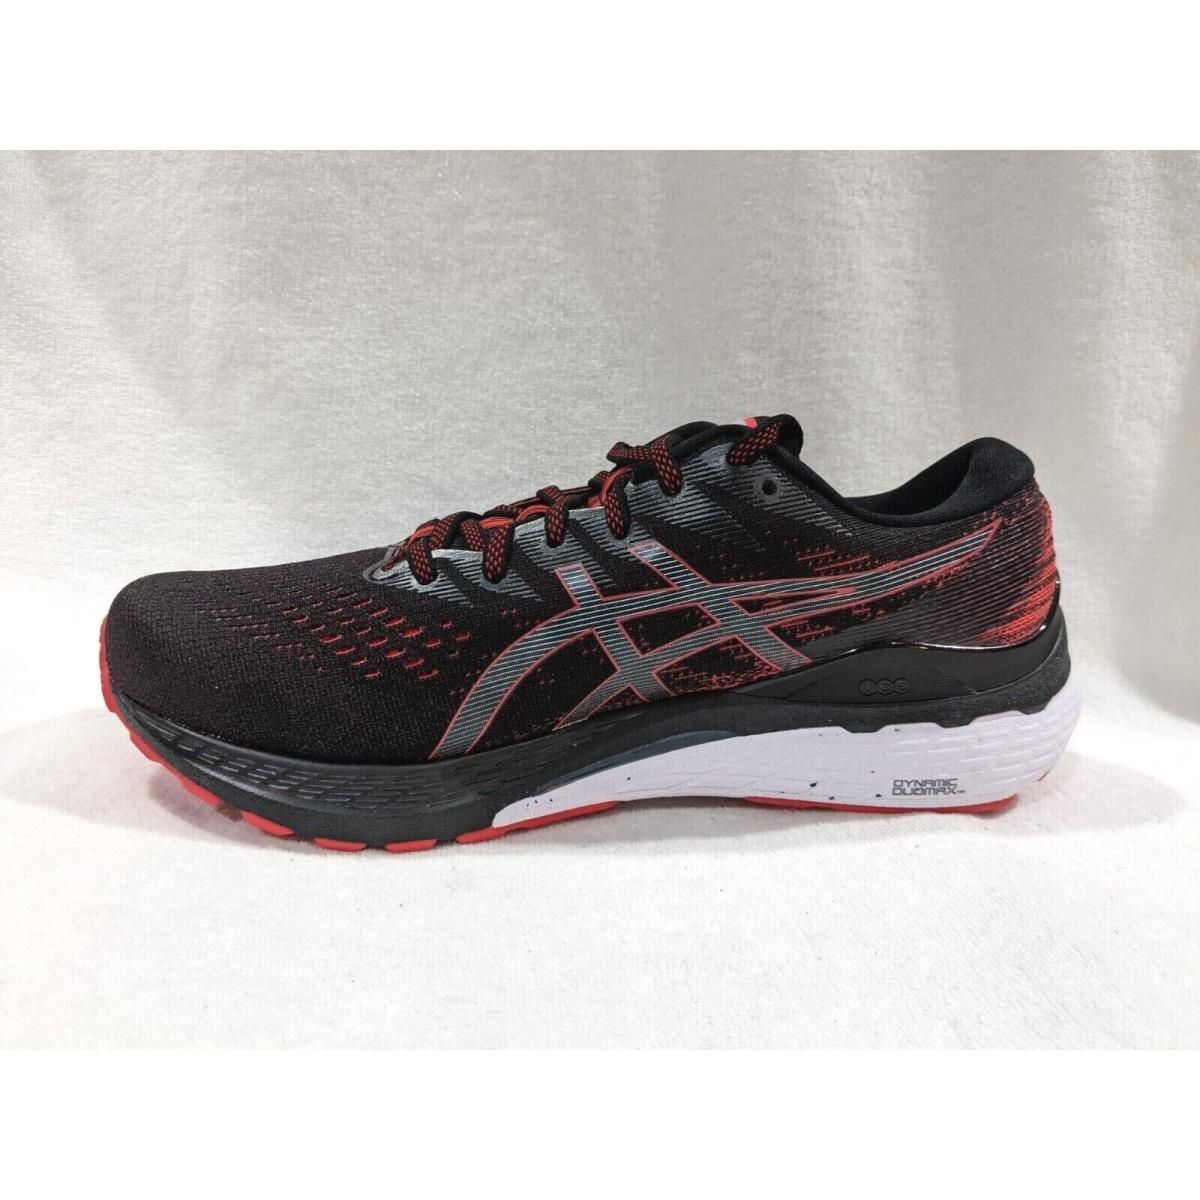 ASICS shoes  - Black , Red 5